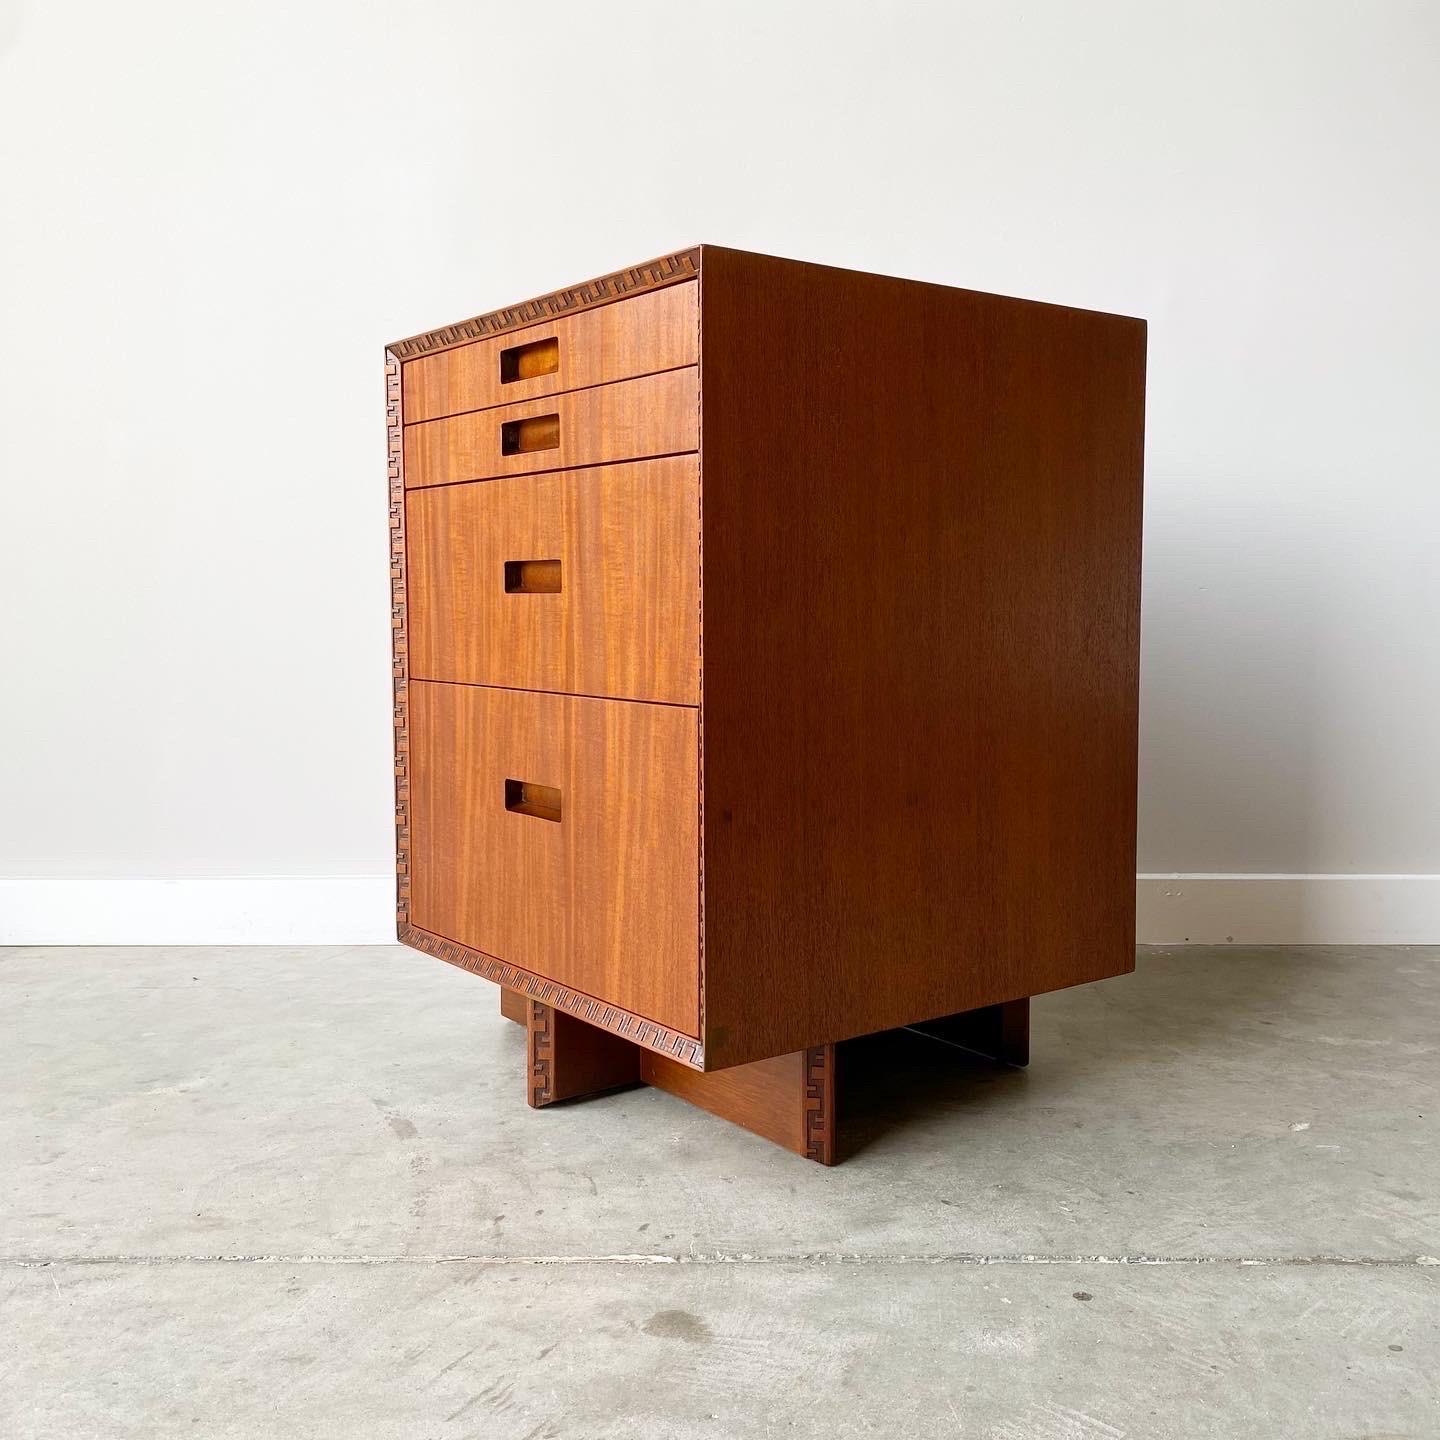 This beautifully refinished Honduran Mahogany 'Taliesin' chest of drawers was designed by Frank Lloyd Wright for Heritage-Henredon in 1955 and produced only for two years, therefore are now highly sought-after and rare collectors items. This example